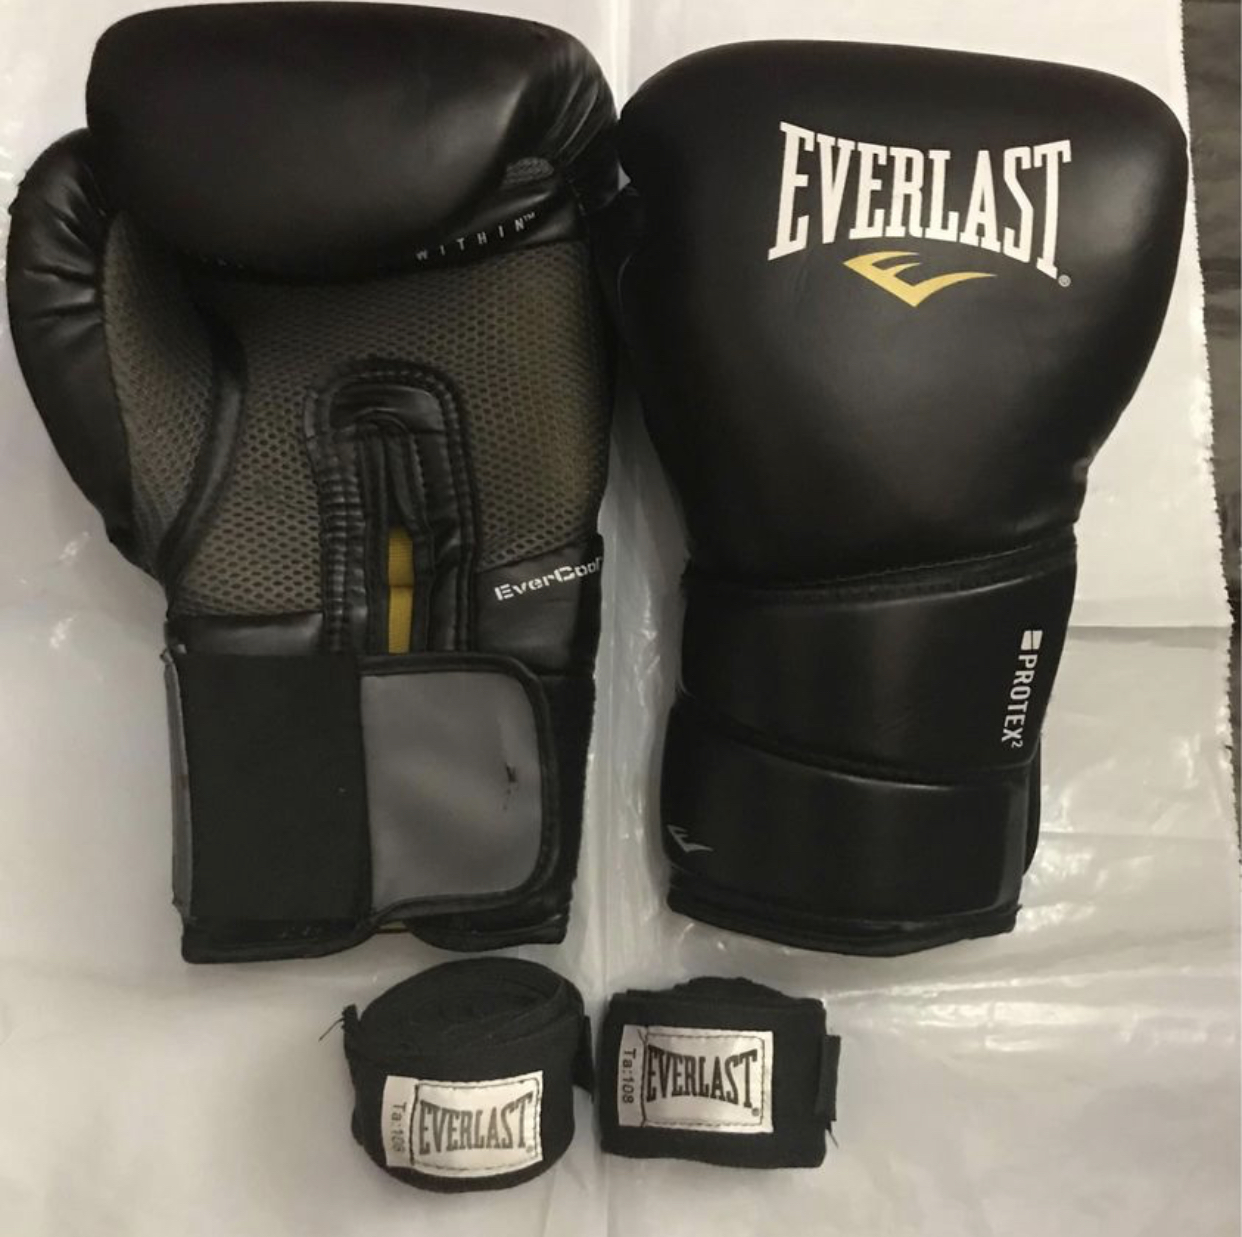 Everlast boxing gloves and hand wraps